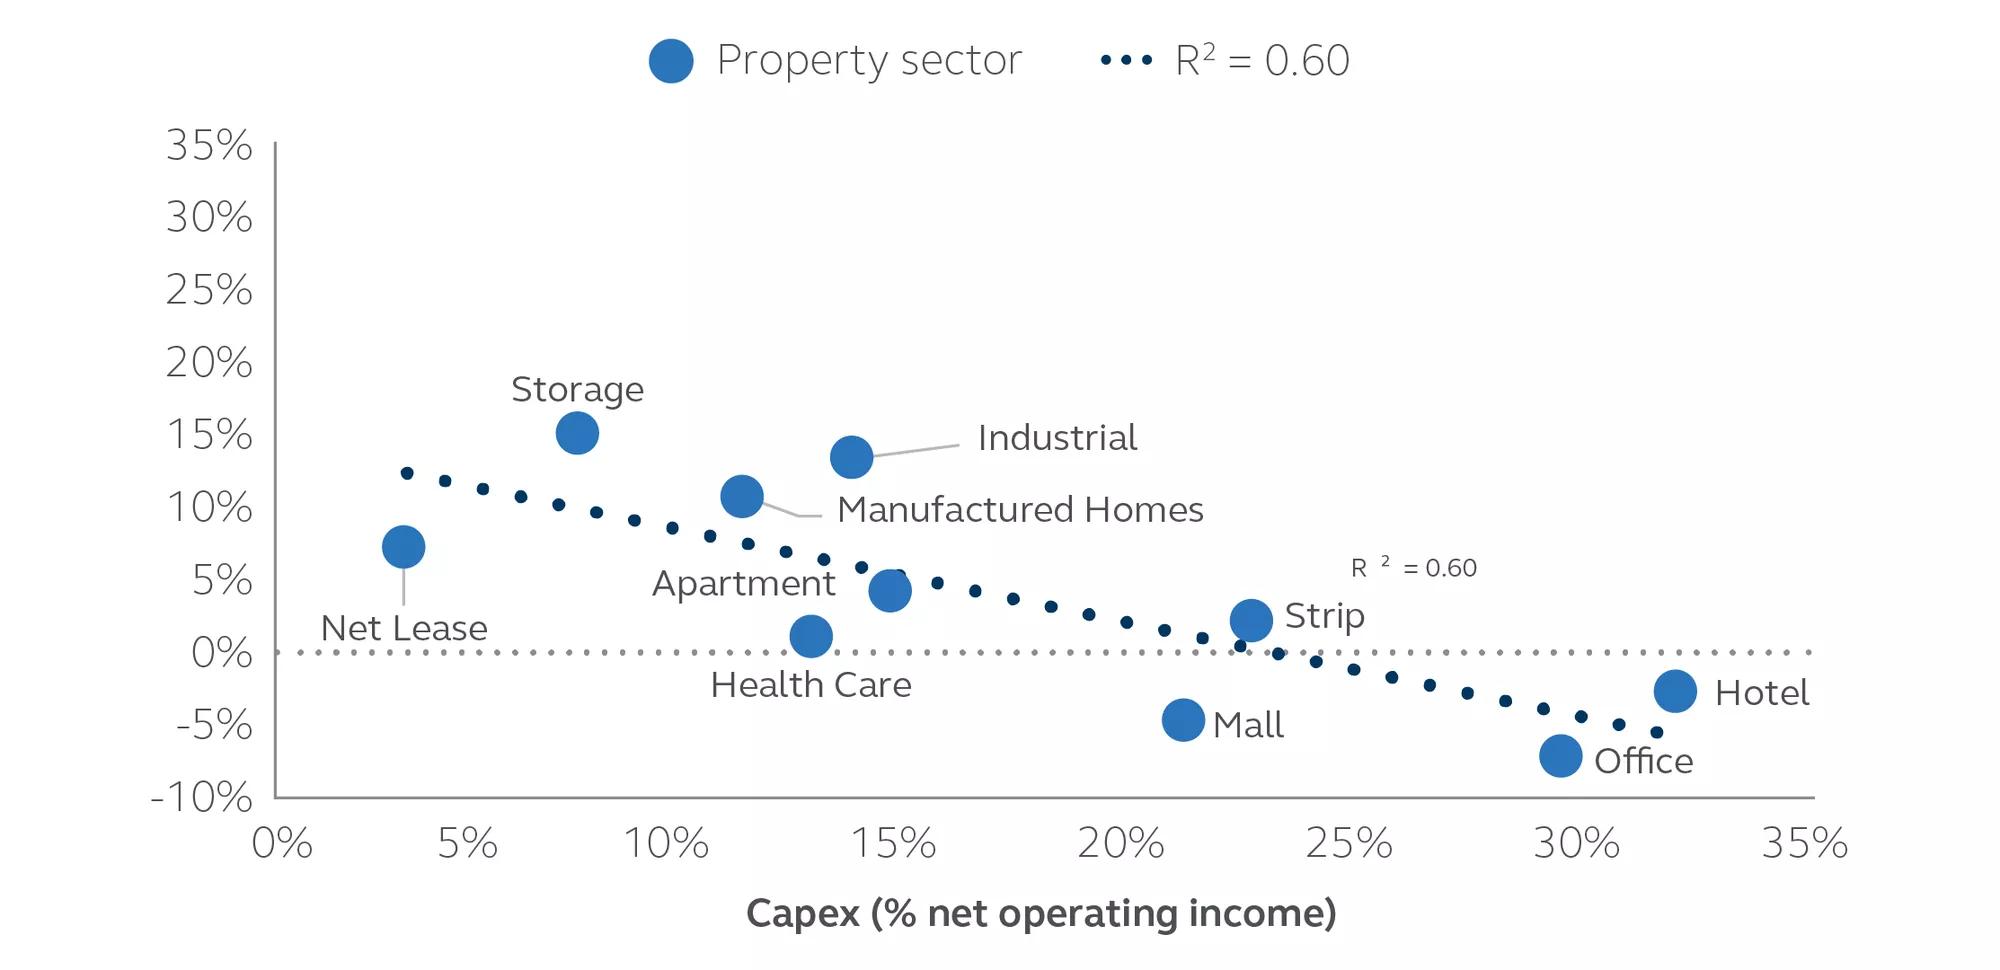 Scatter plot of Capex and 5-year public market total return